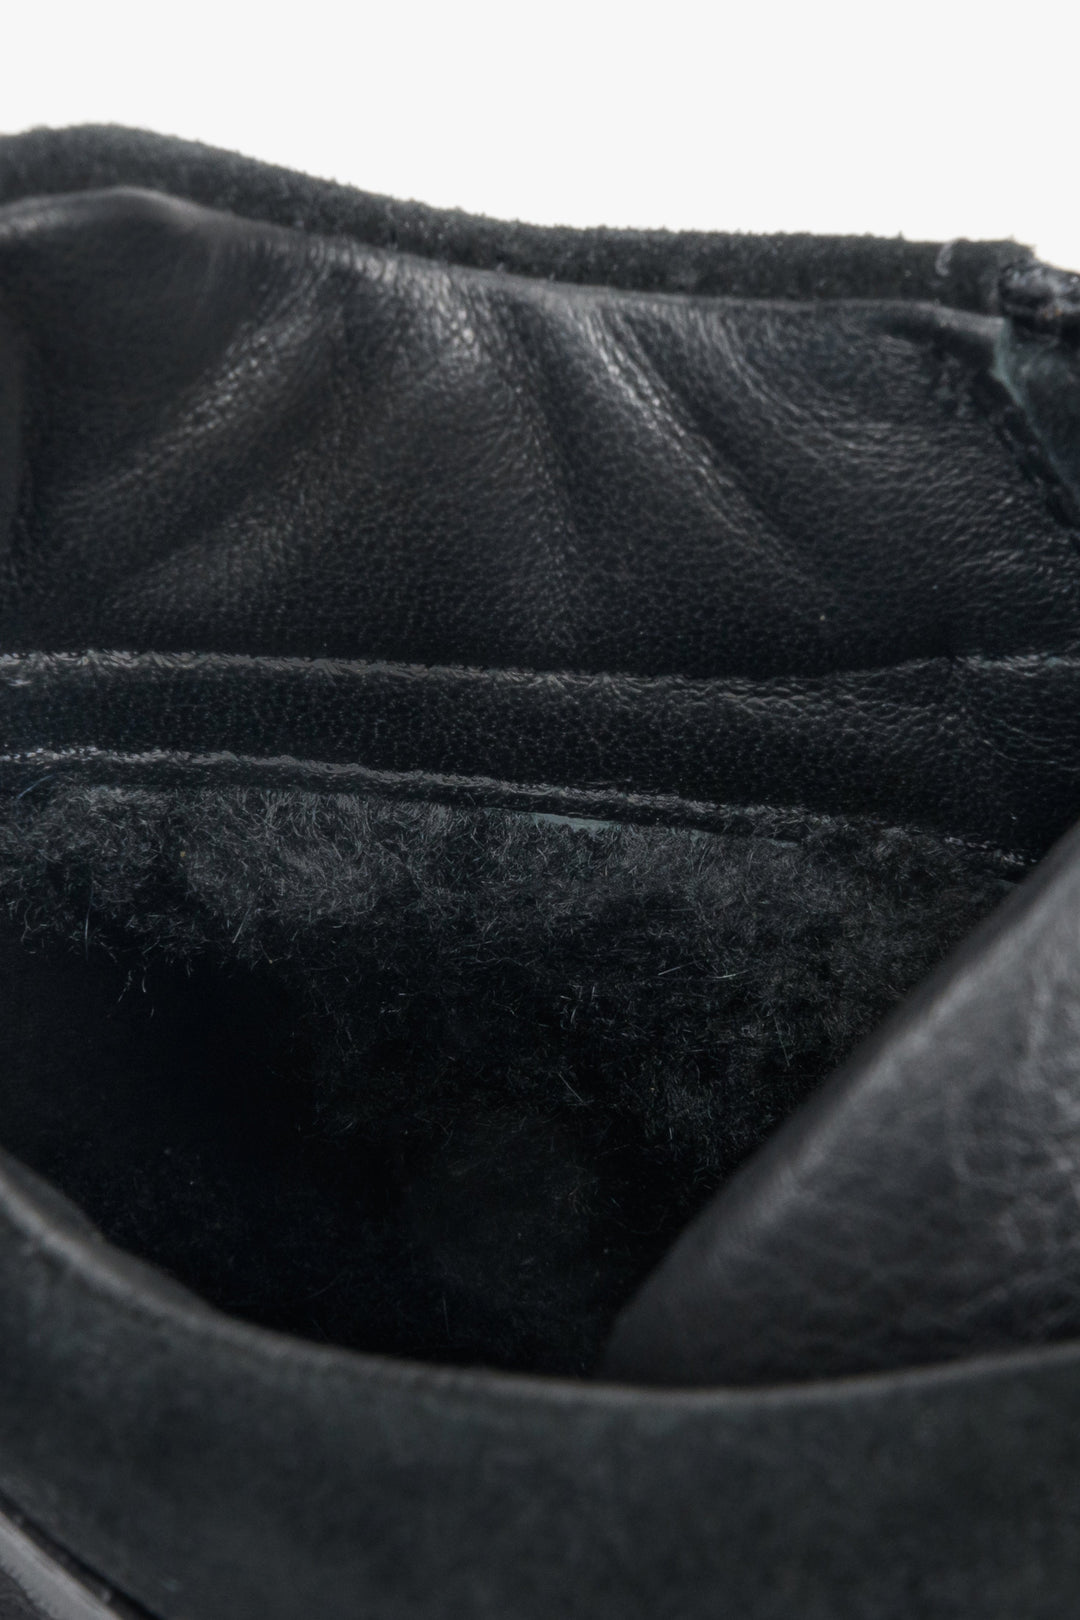 Winter high-top men's sneakers by Estro made of genuine leather - close-up on the inside of the shoe.